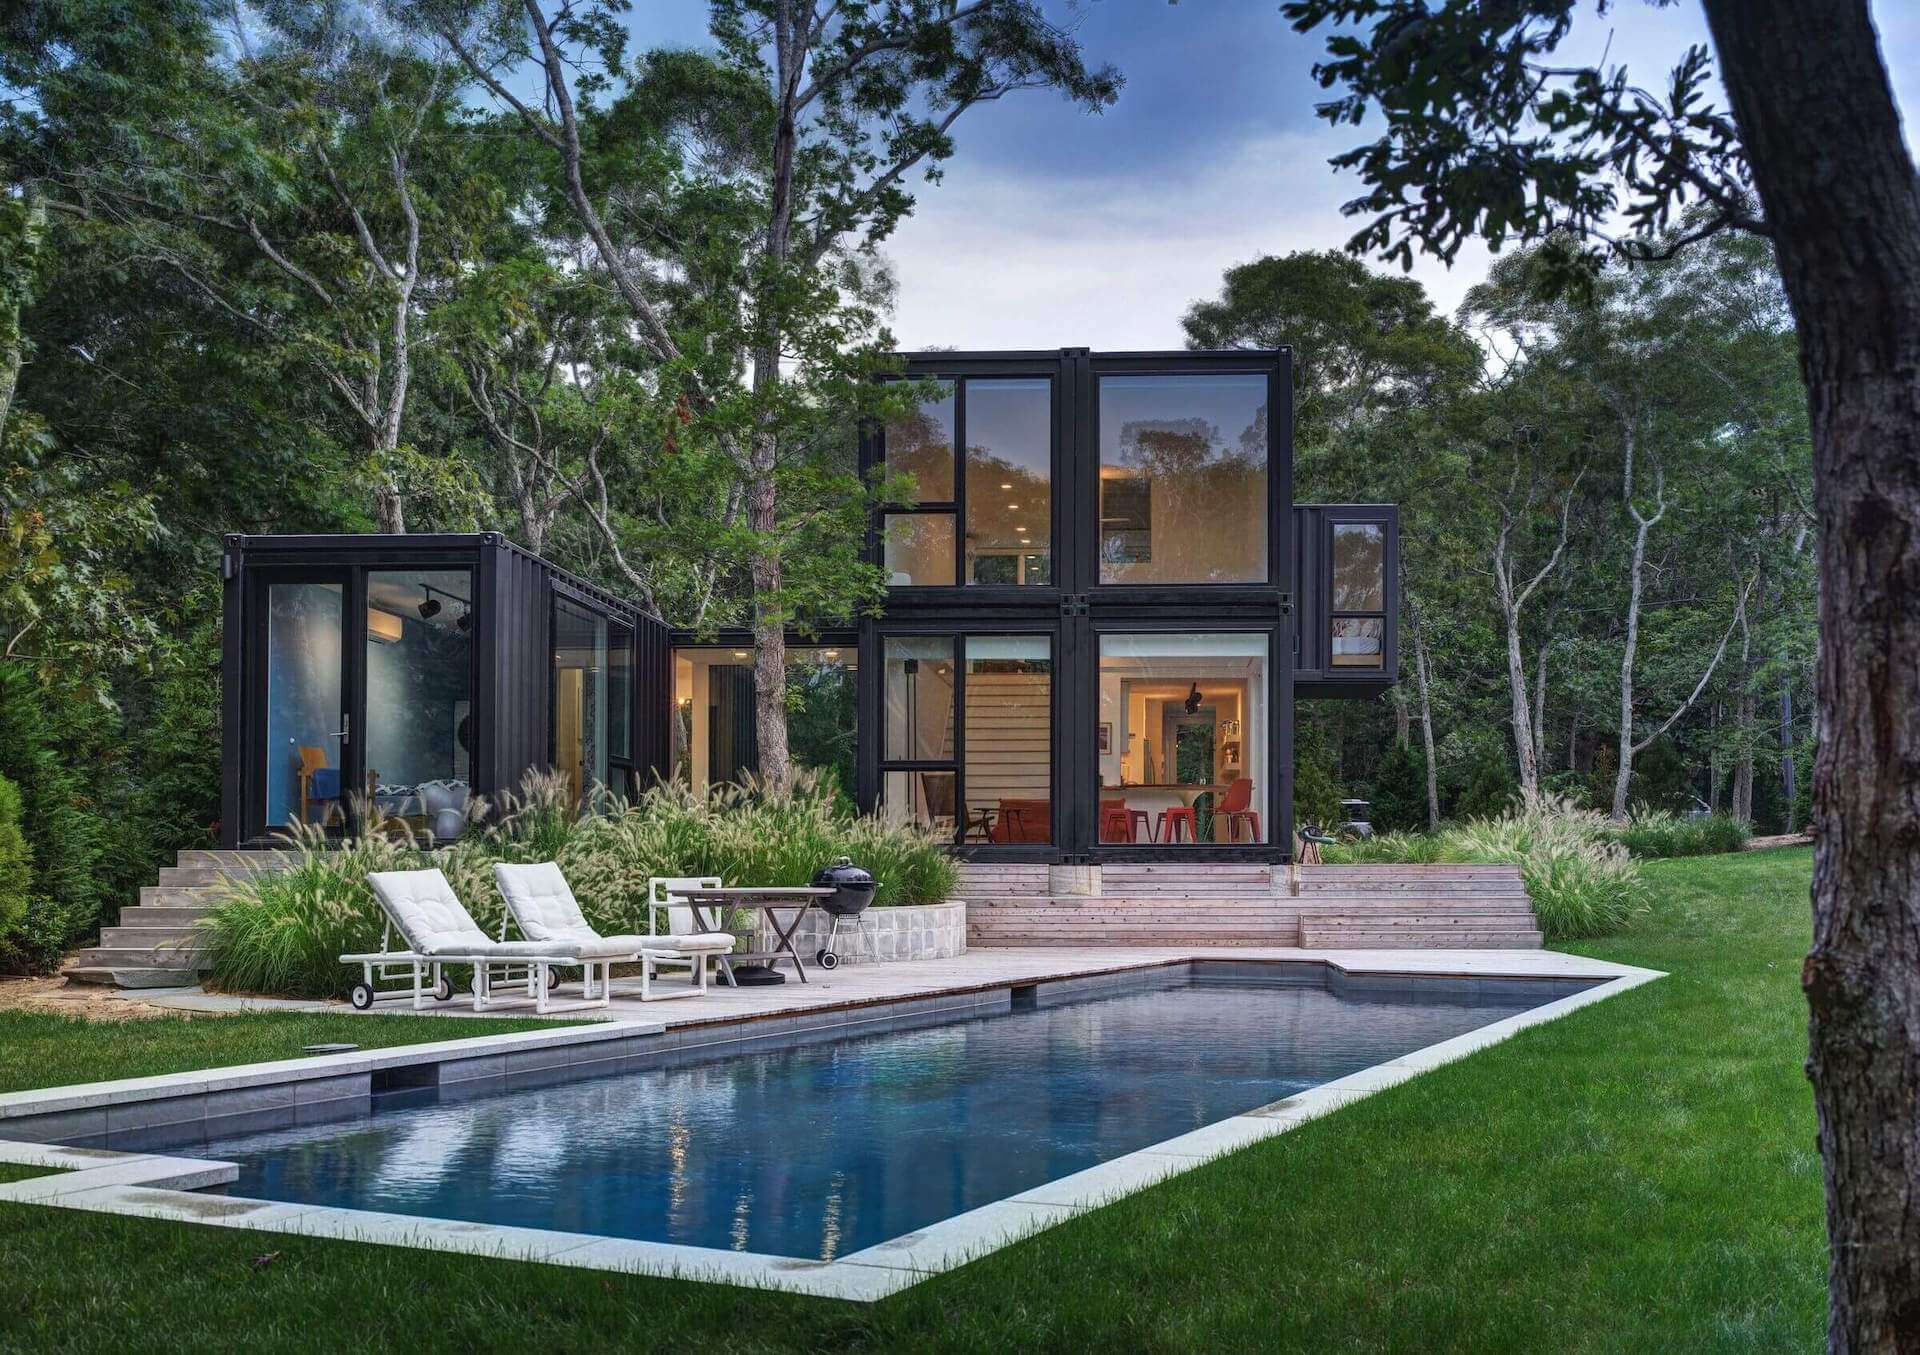 Amagansett Modular - overview of the pool and backyard